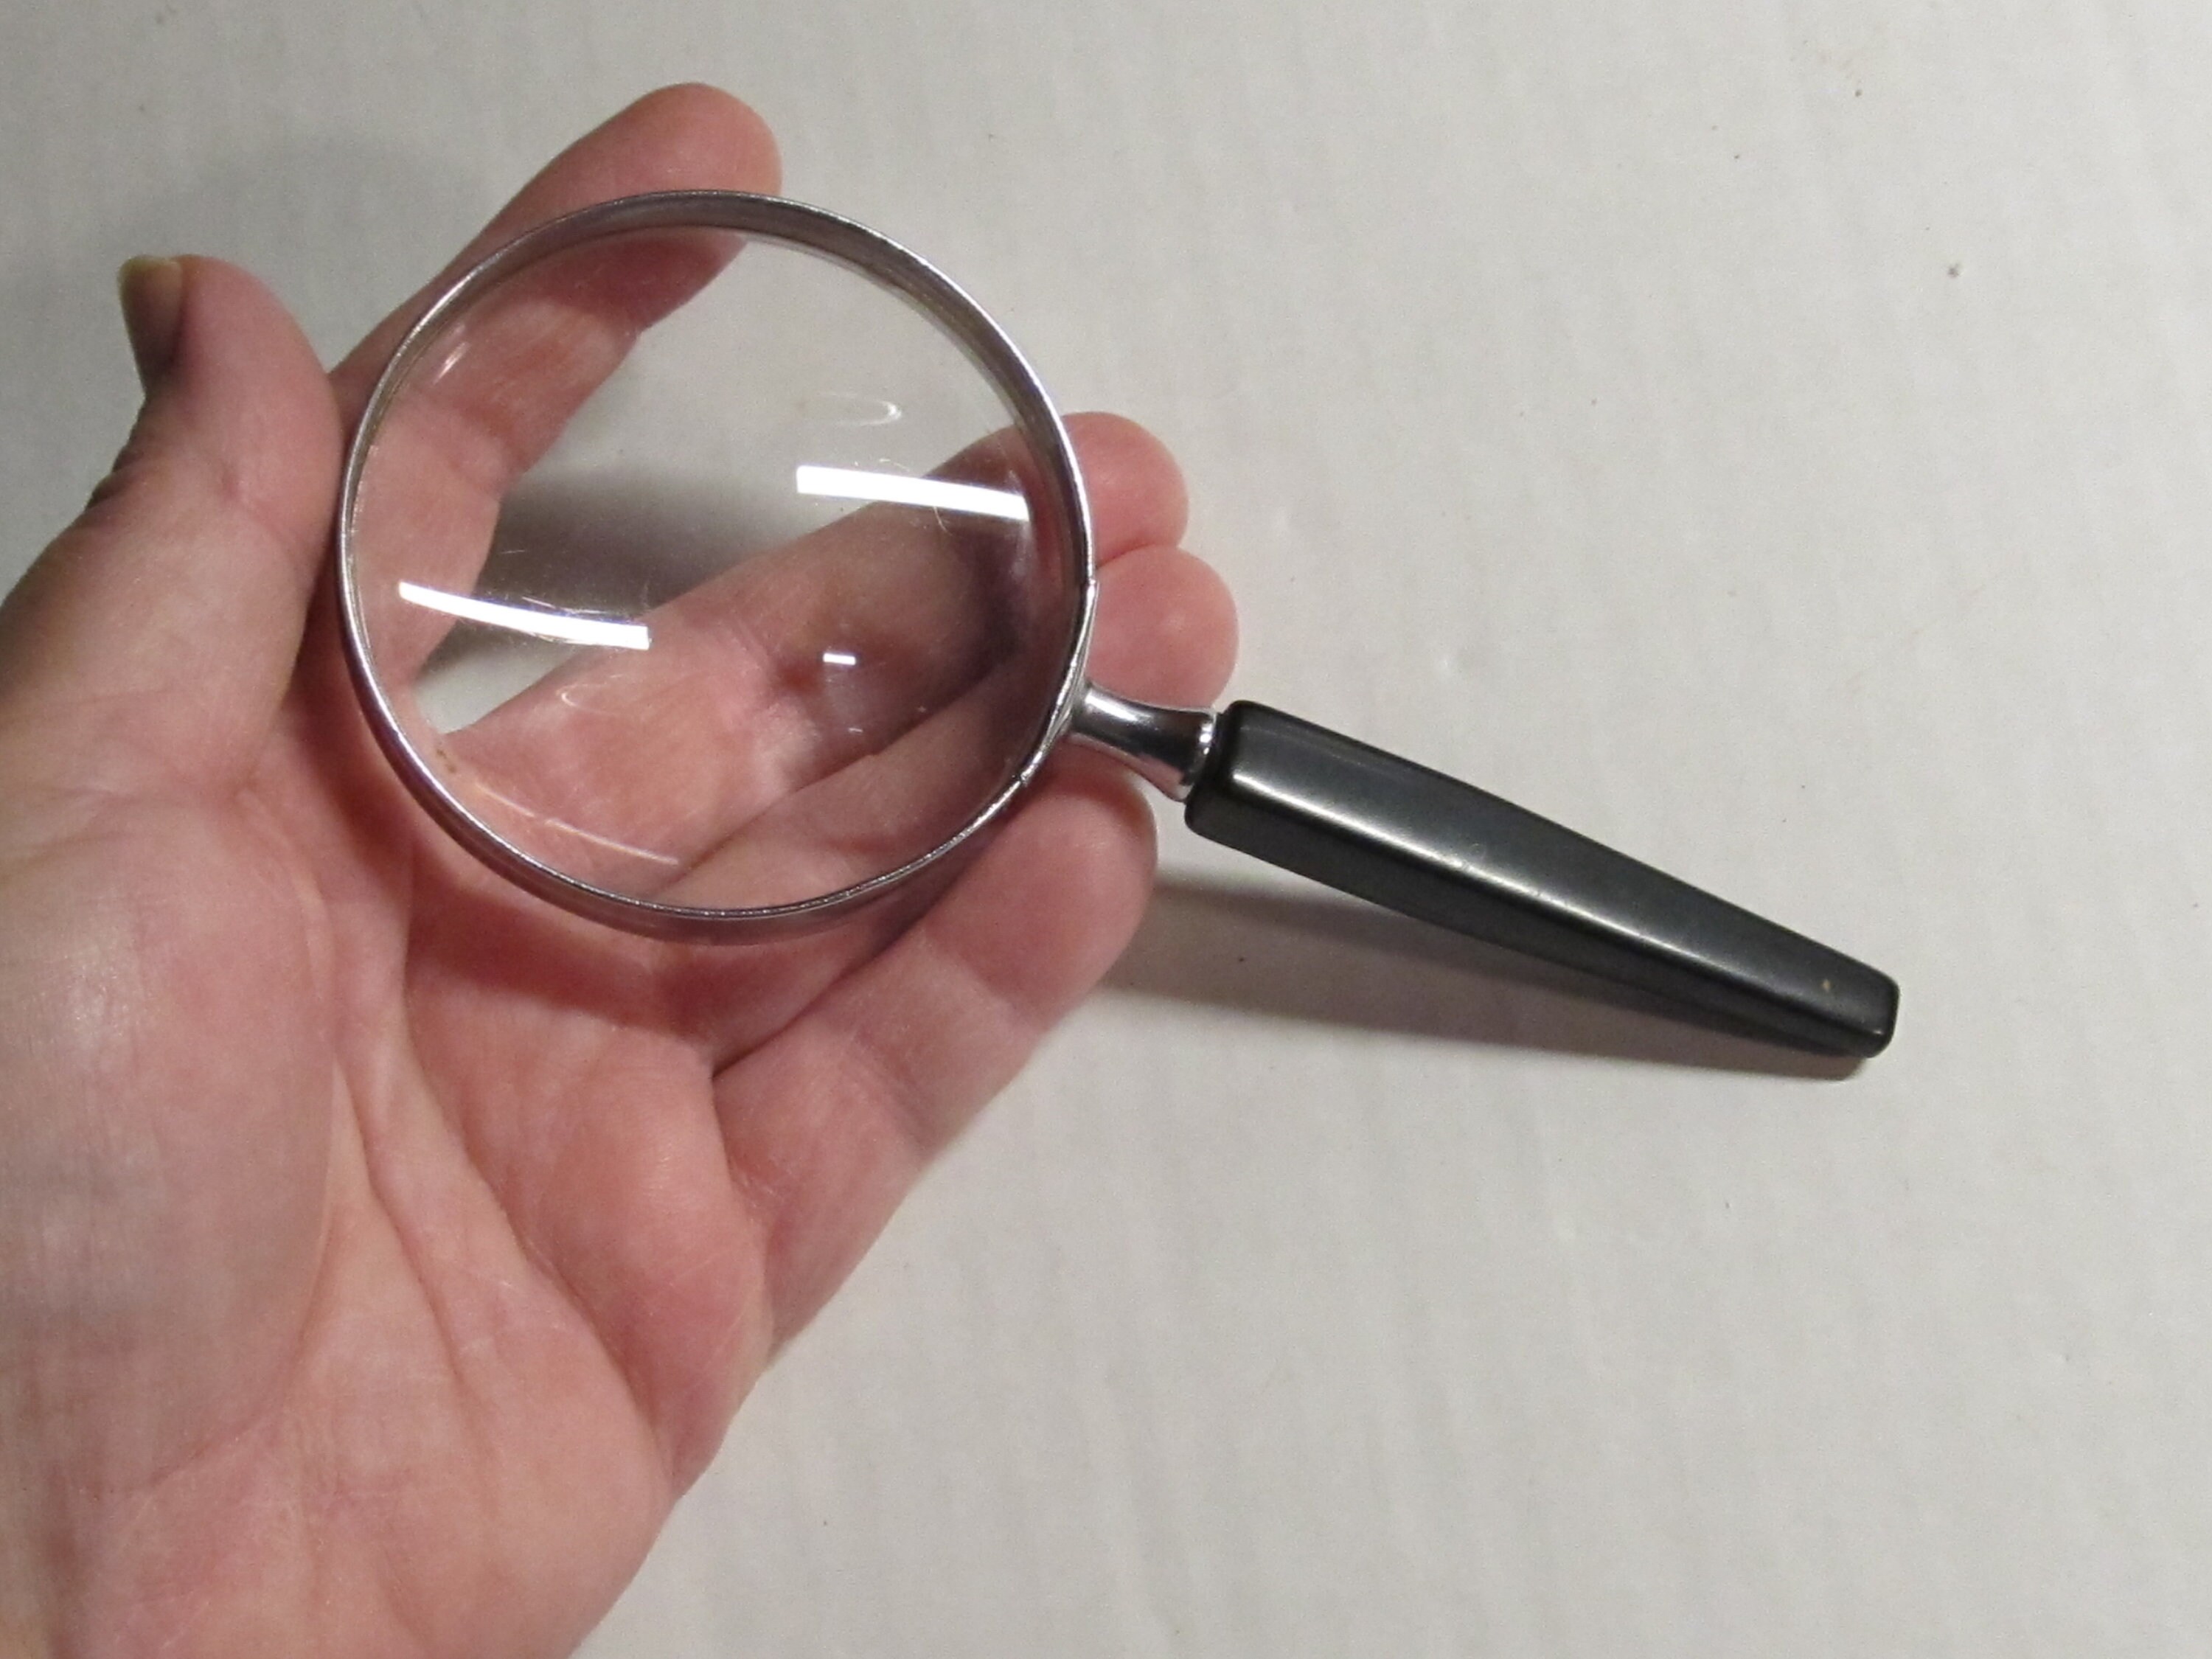 Vintage 1980's Pocket Magnifying Glass, Black Plastic Covered Case W/ 1 7/8  Diameter, Unmarked 5x Magnification 